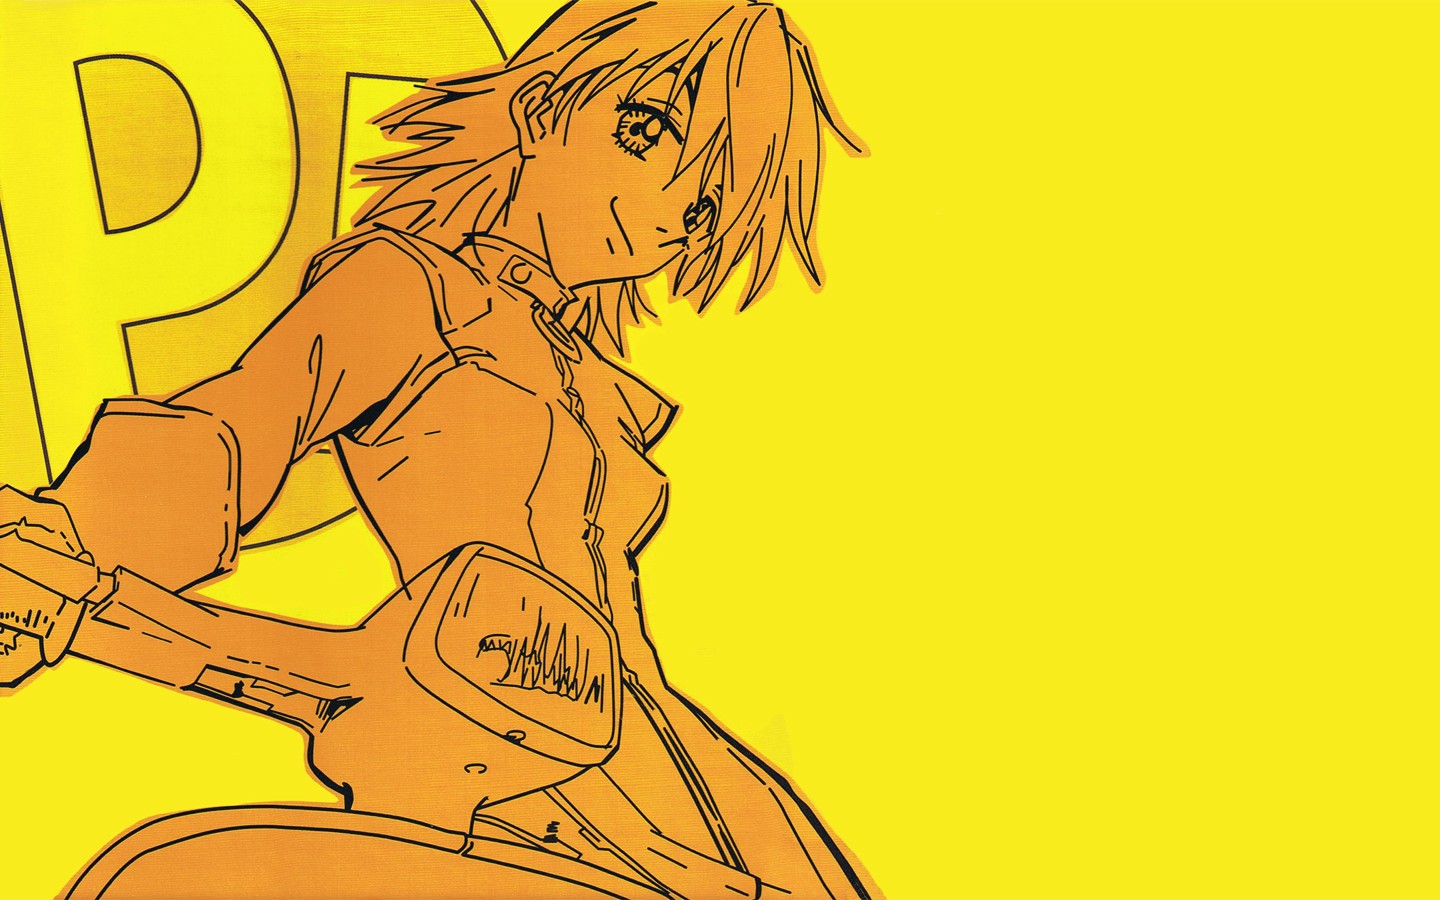 Anime 1440x900 FLCL anime girls anime yellow background women with scooters scooters vehicle